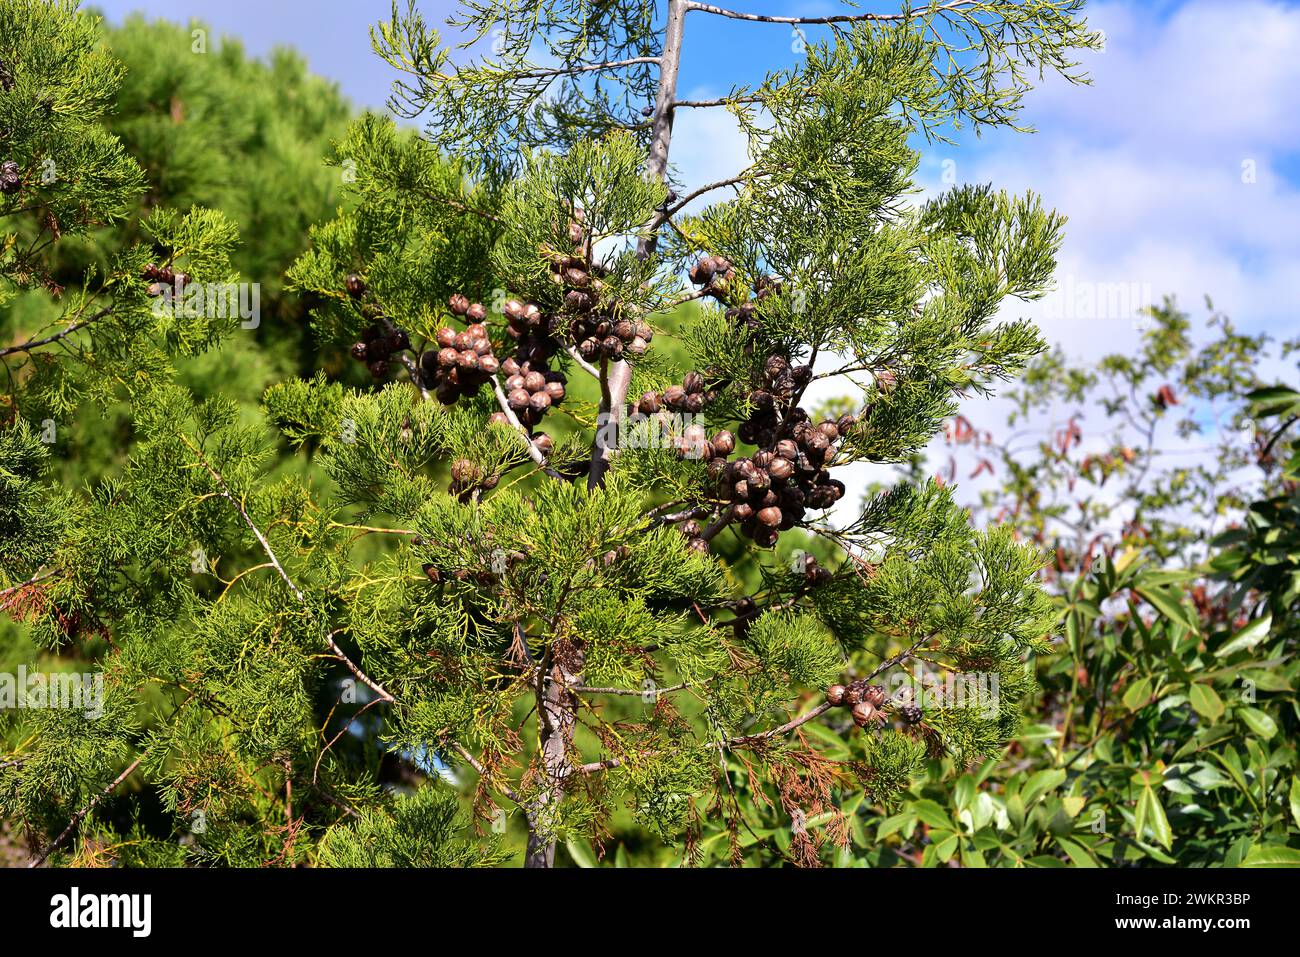 Mountain cypress (Widdringtonia nodiflora) is a coniferous evergreen small tree or shrub native to South Africa mountains. Cones and leaves detail. Stock Photo